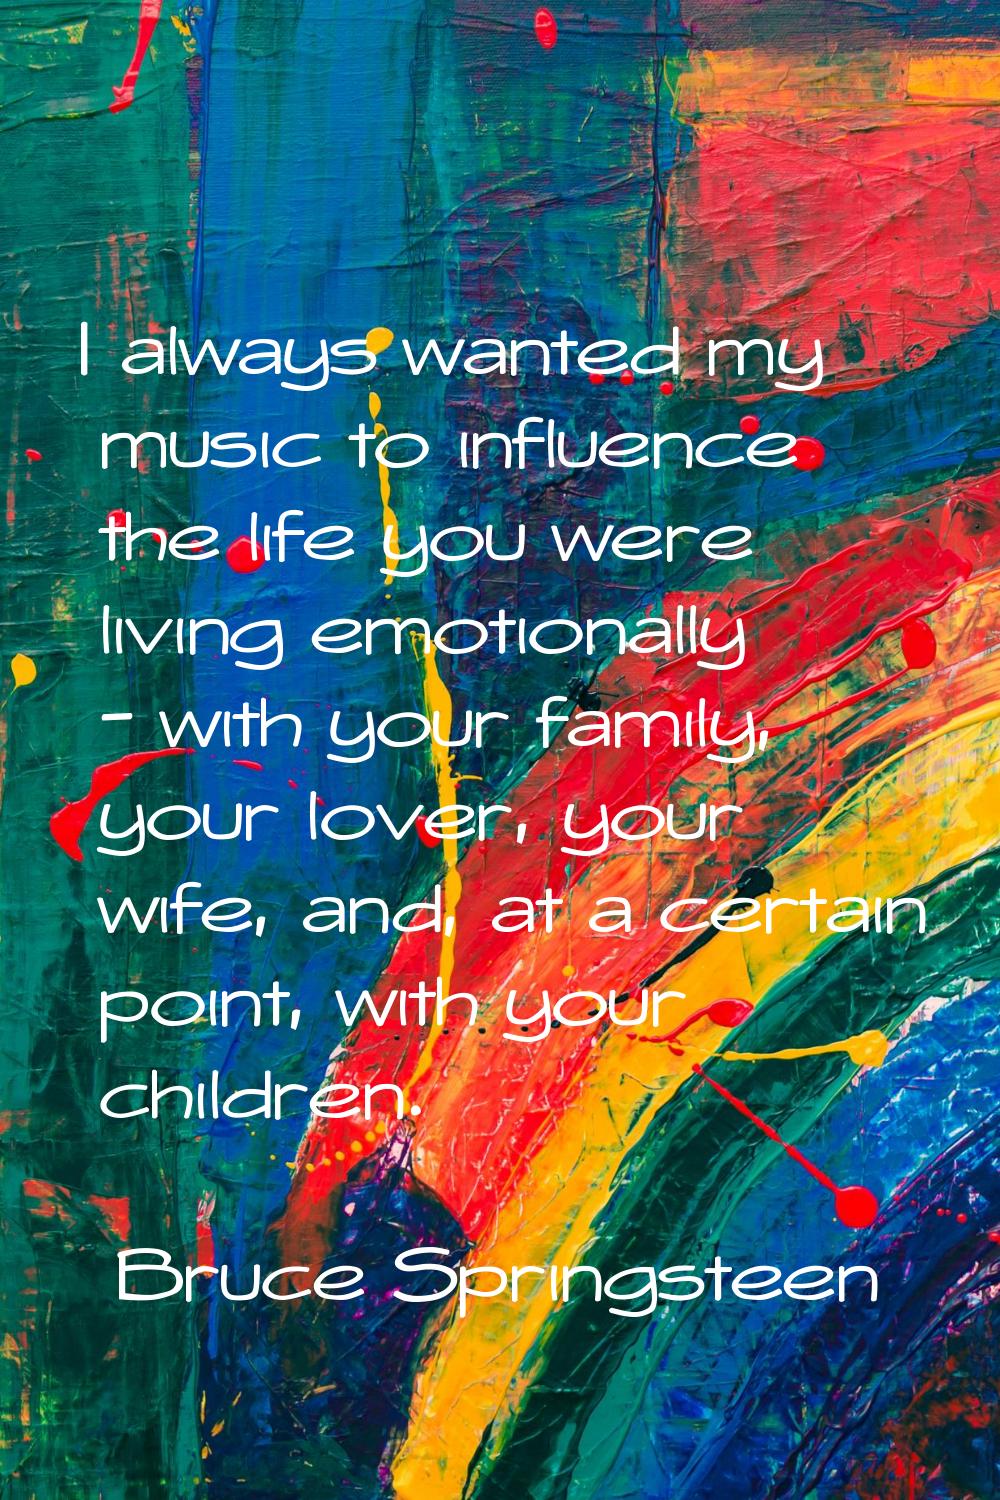 I always wanted my music to influence the life you were living emotionally - with your family, your